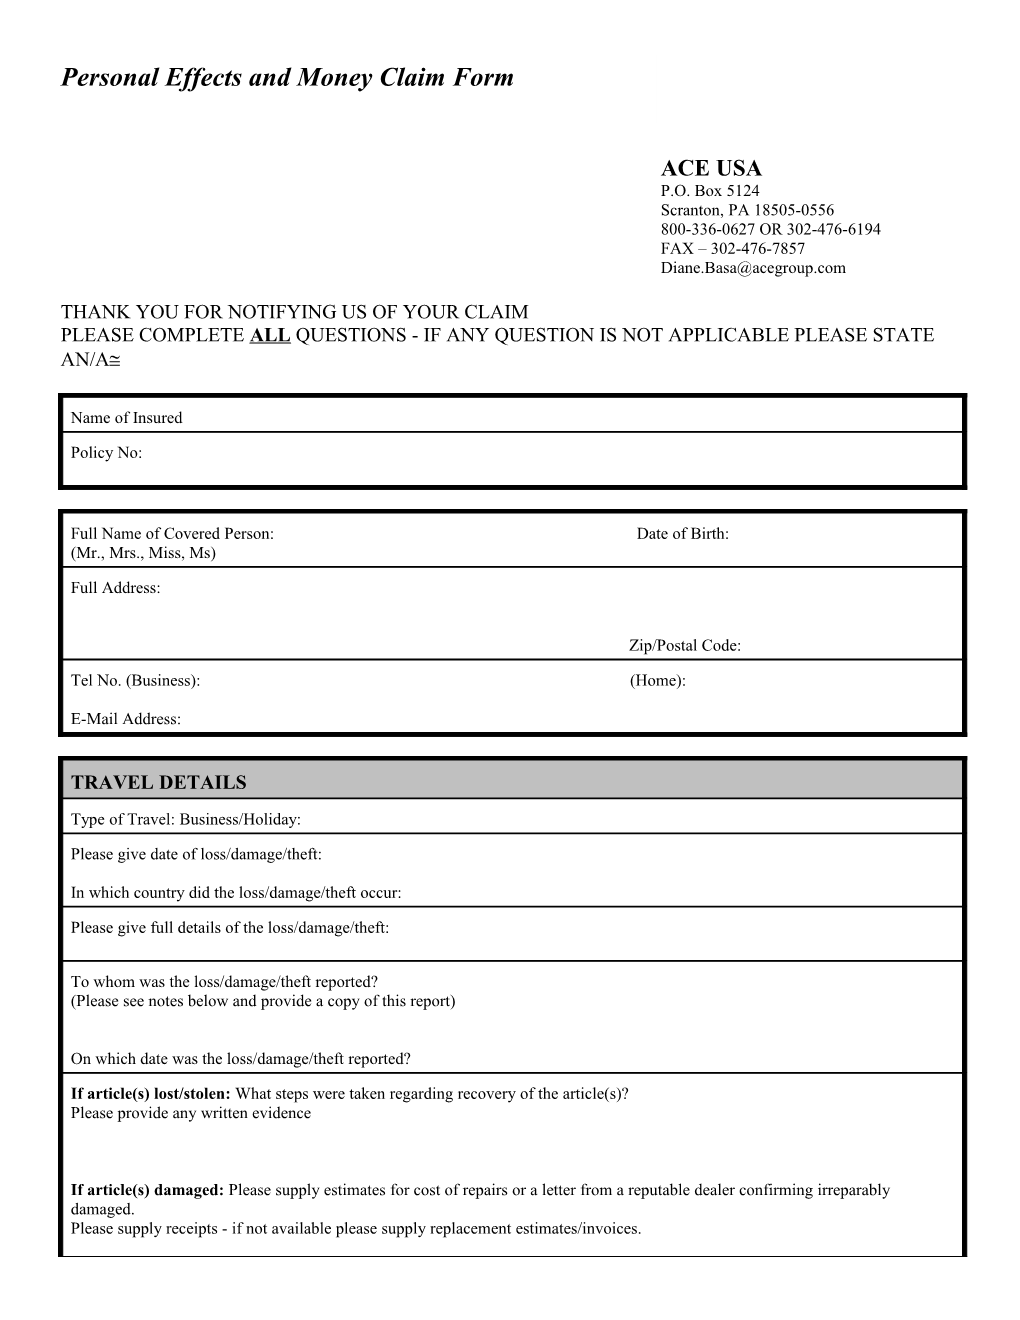 Personal Effects and Money Claim Form